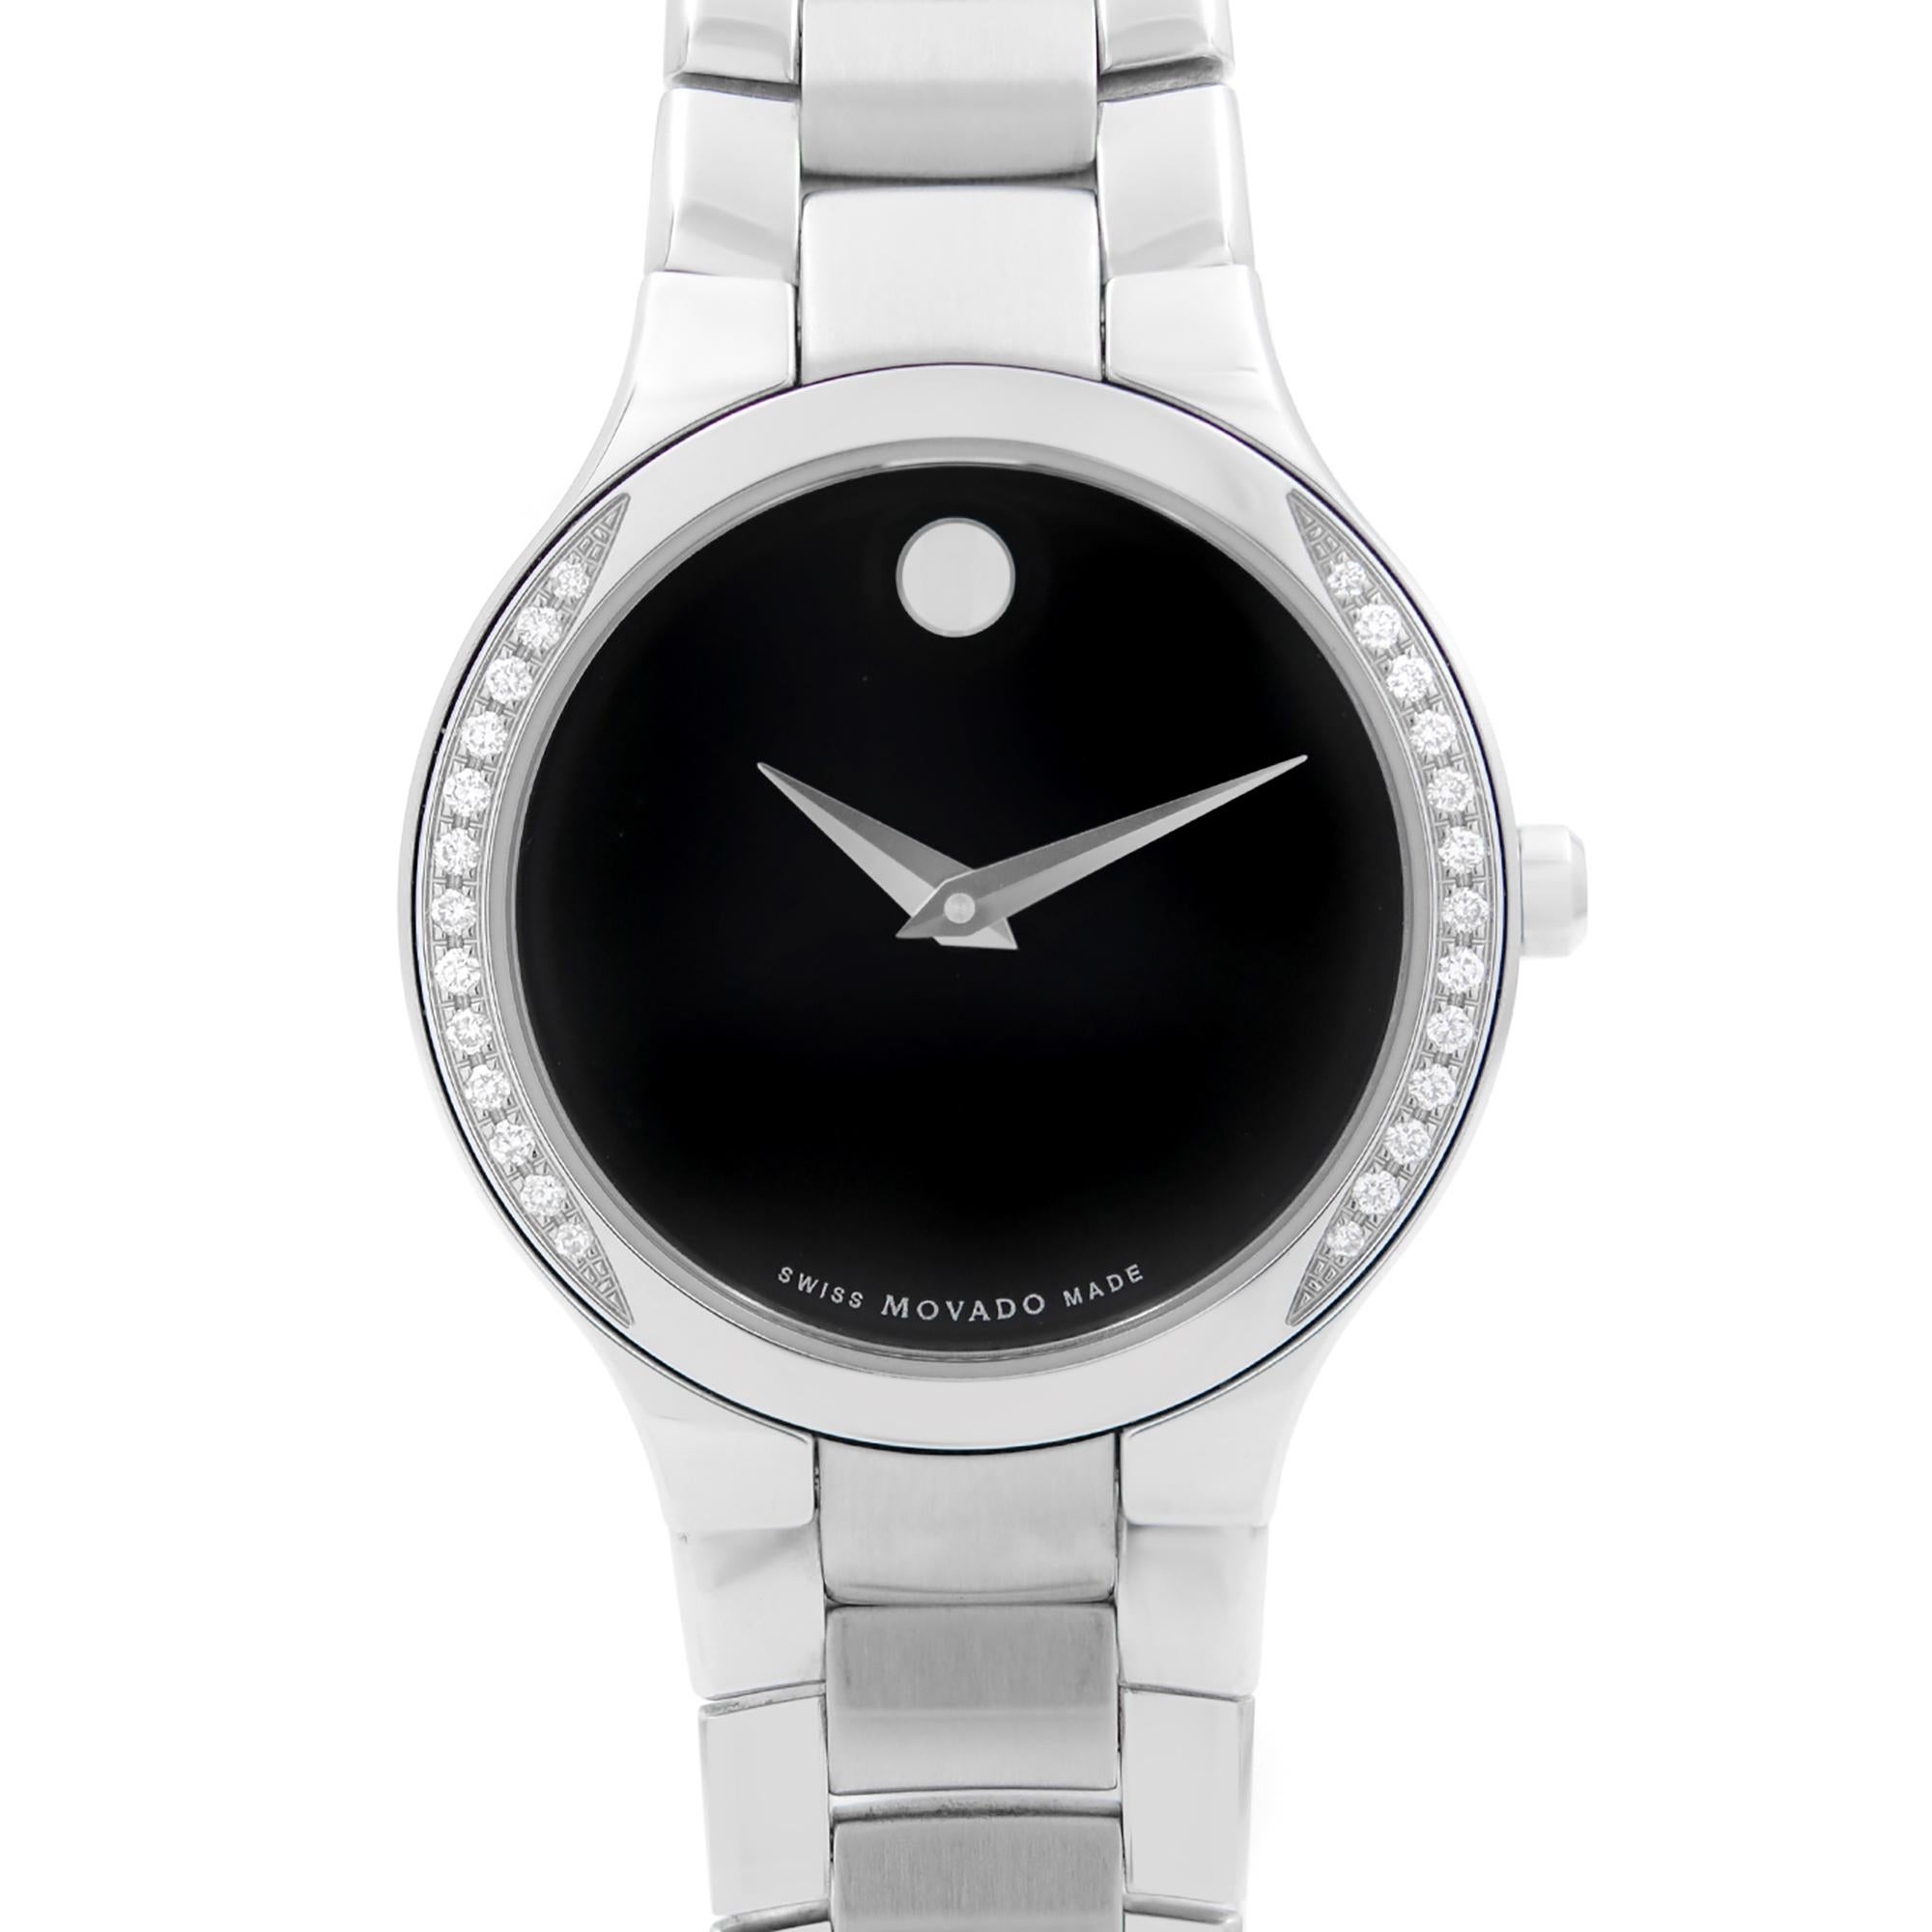 Unworn Movado Movado Serio 26mm Steel Diamond Bezel Black Dial Quartz Ladies Watch 0606385. This Beautiful Timepiece is Powered by Quartz (Battery) Movement and Features: Stainless Steel Case and Bracelet, Fixed Stainless Steel Bezel Set with